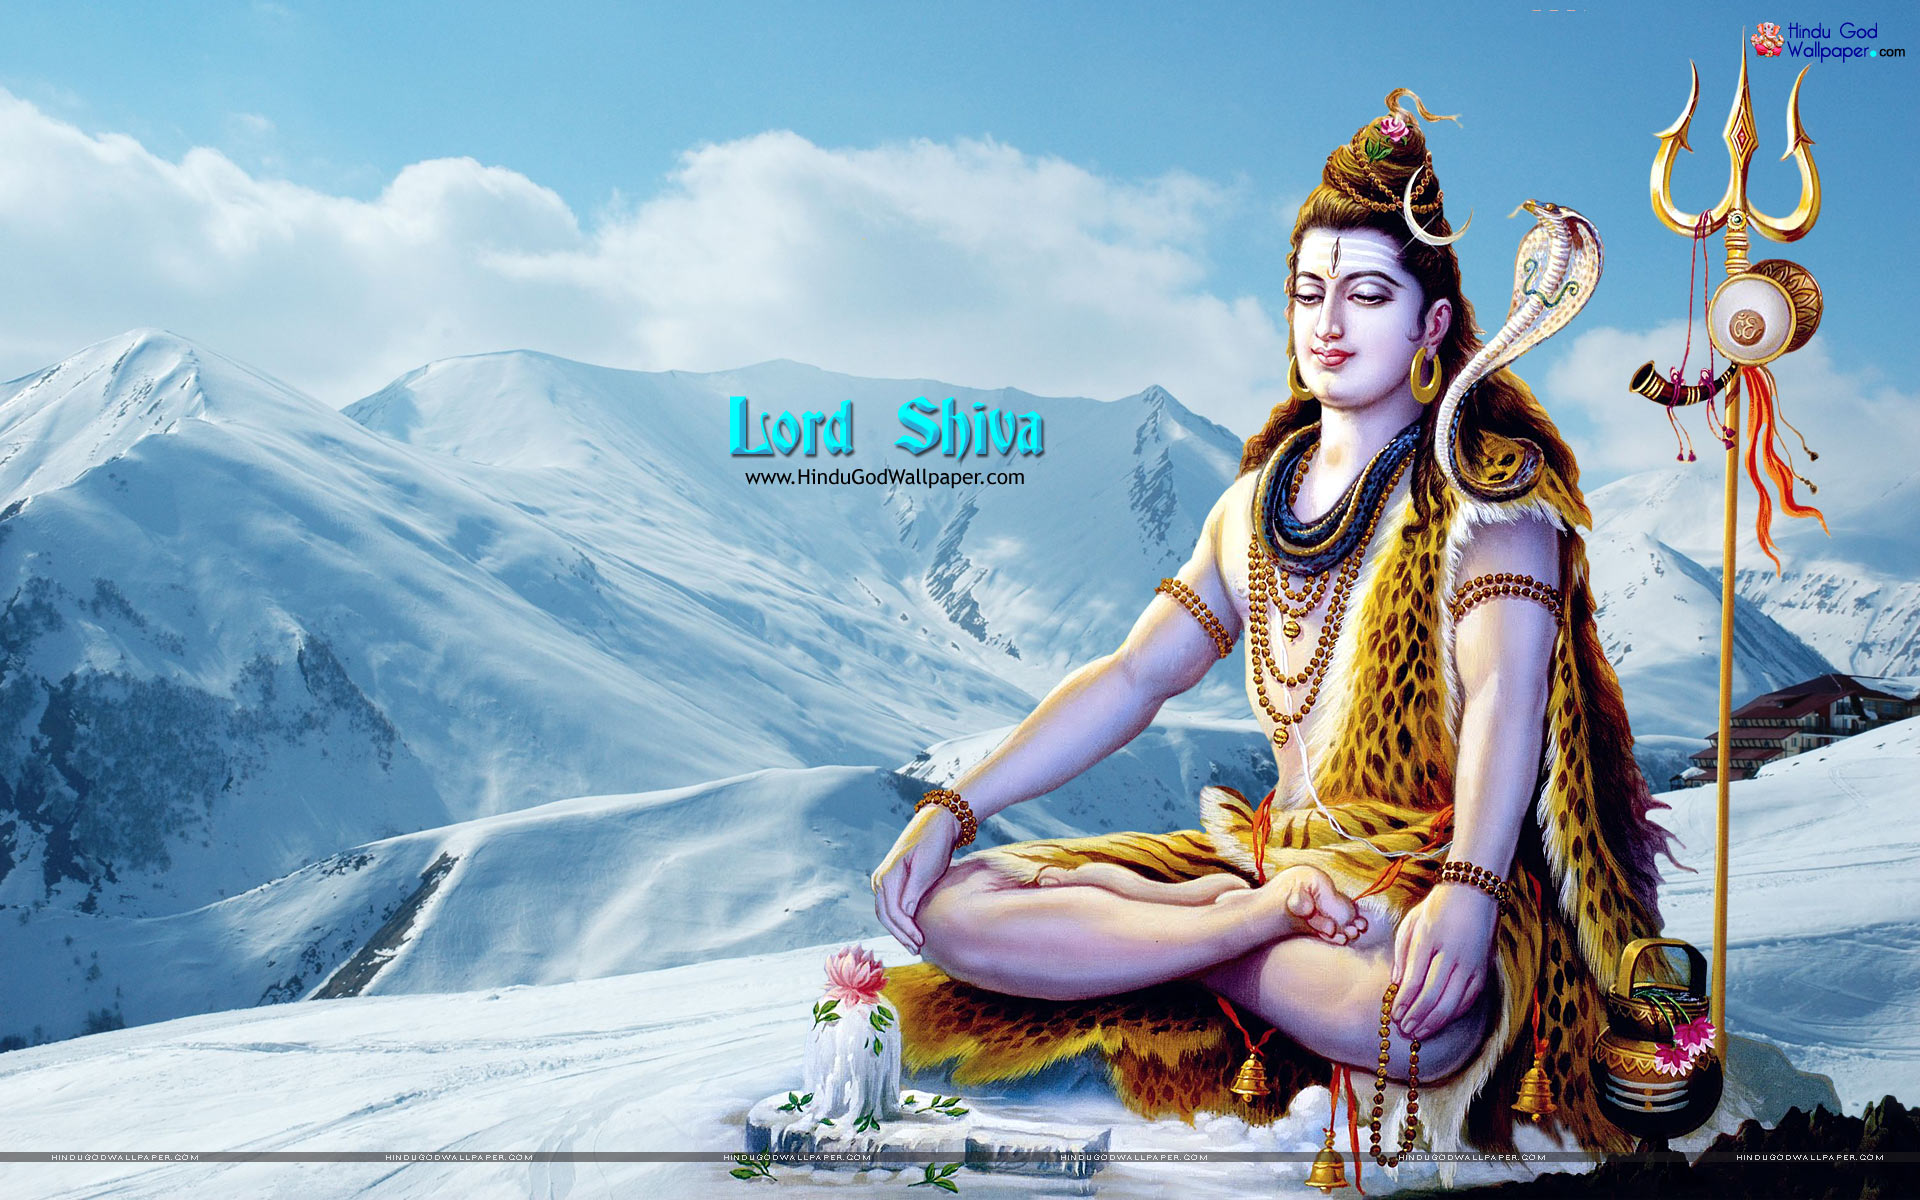 Lord Shiva Wallpaper Pictures Image Full Size